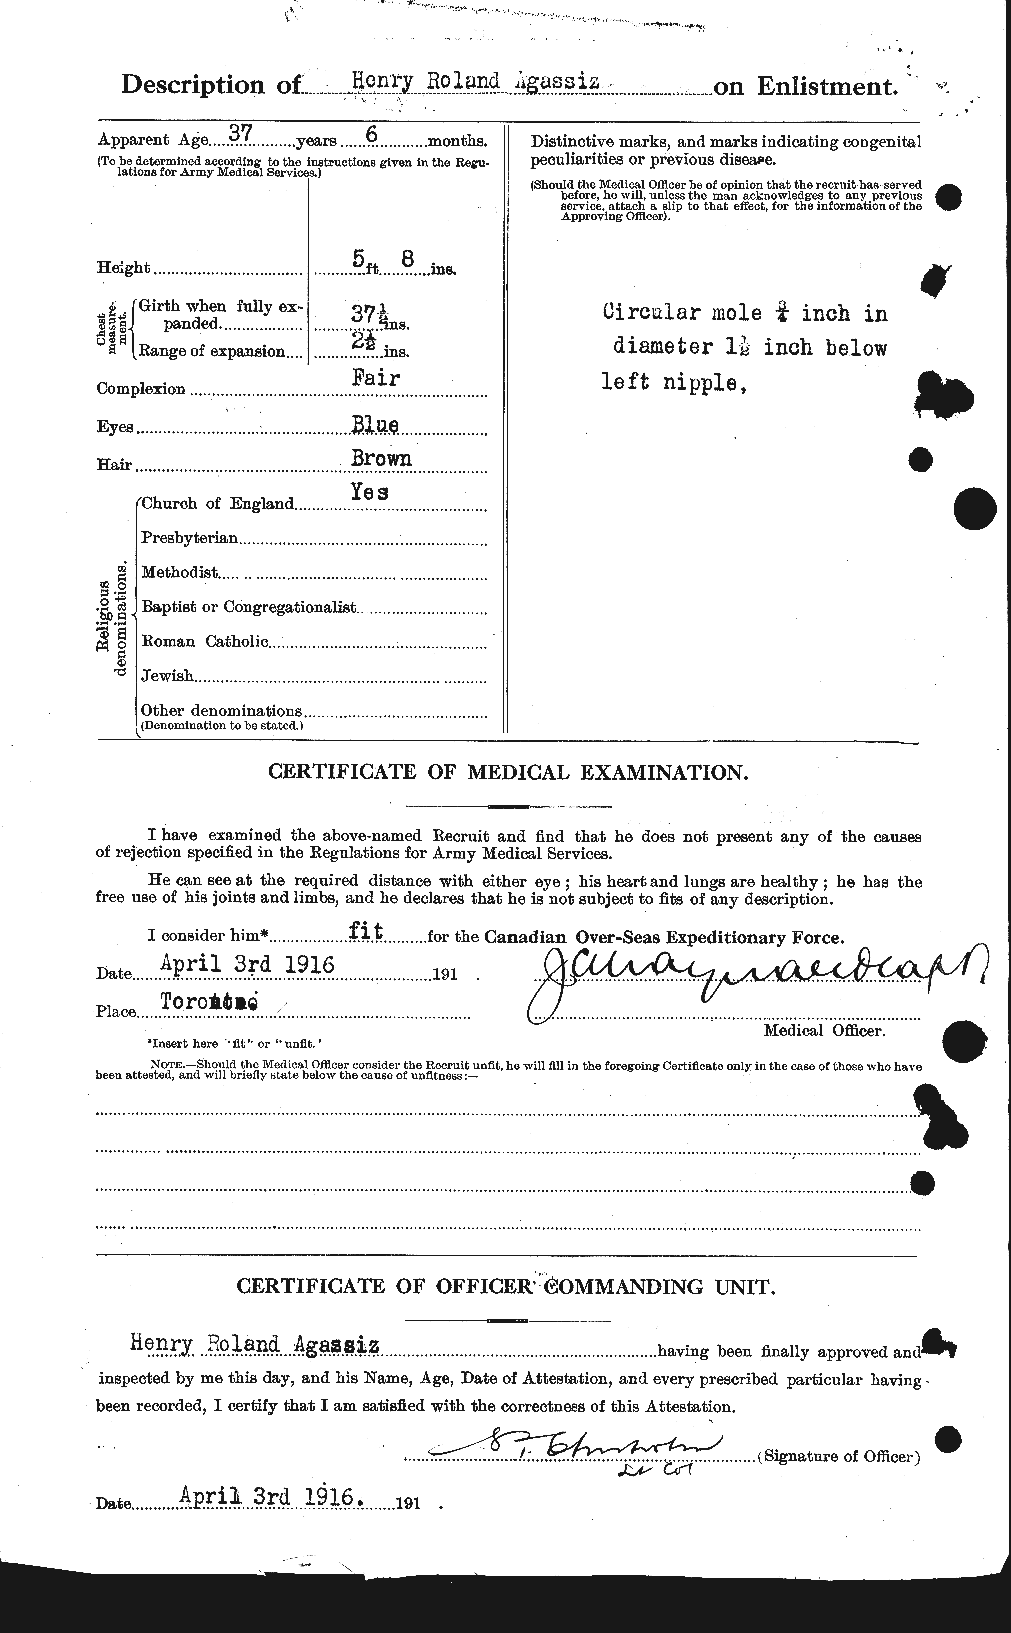 Personnel Records of the First World War - CEF 203698b